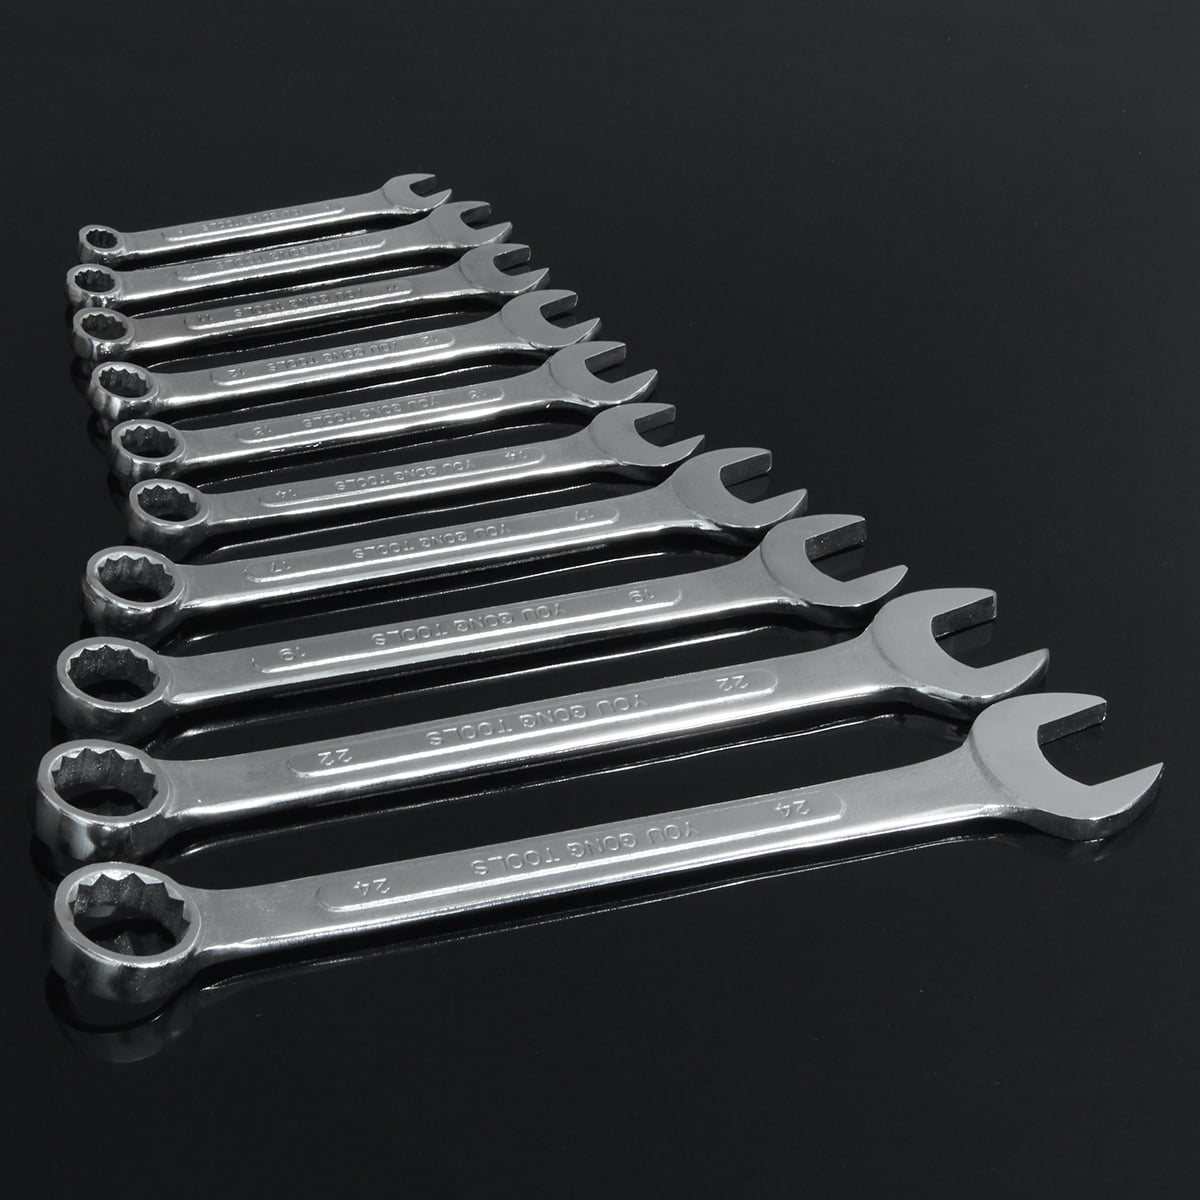 Set of 10pcs 8mm-24mm Open and Box End Metric Spanner FINDER BS192183D Combination Wrench